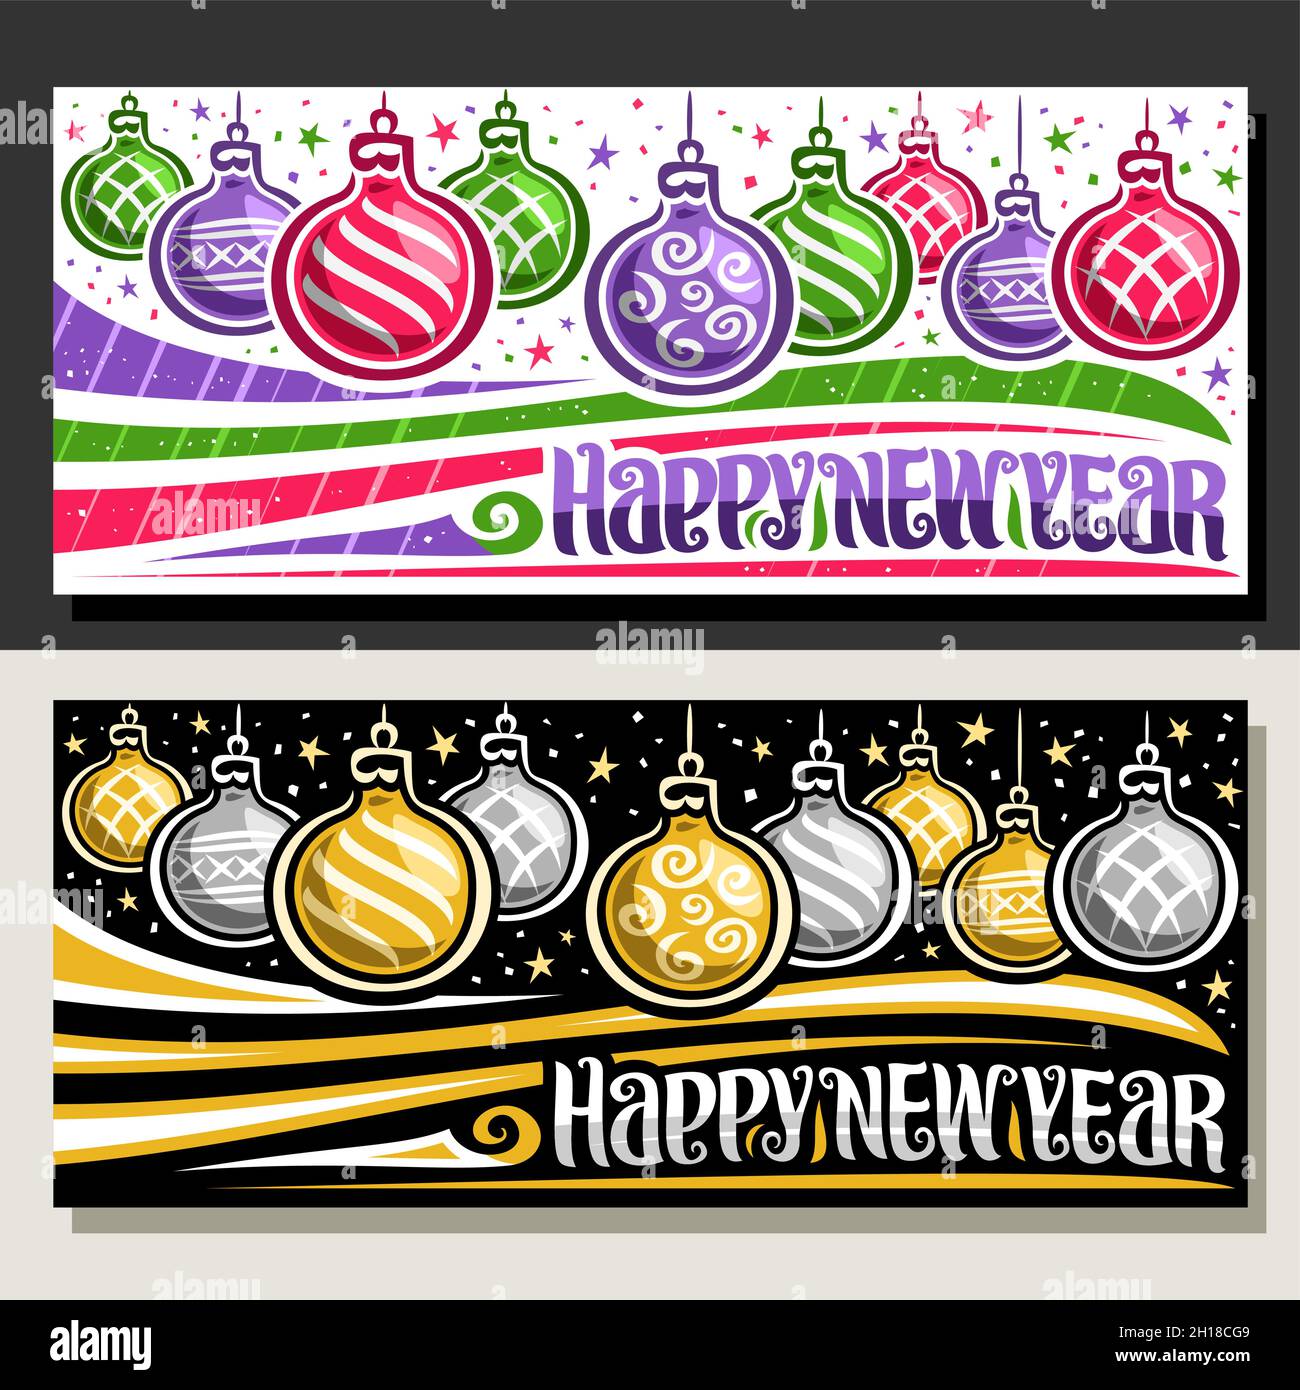 Vector banners for New Year, greeting card with illustrations of decorative flourishes, cartoon colorful christmas balls hanging on string for winter Stock Vector